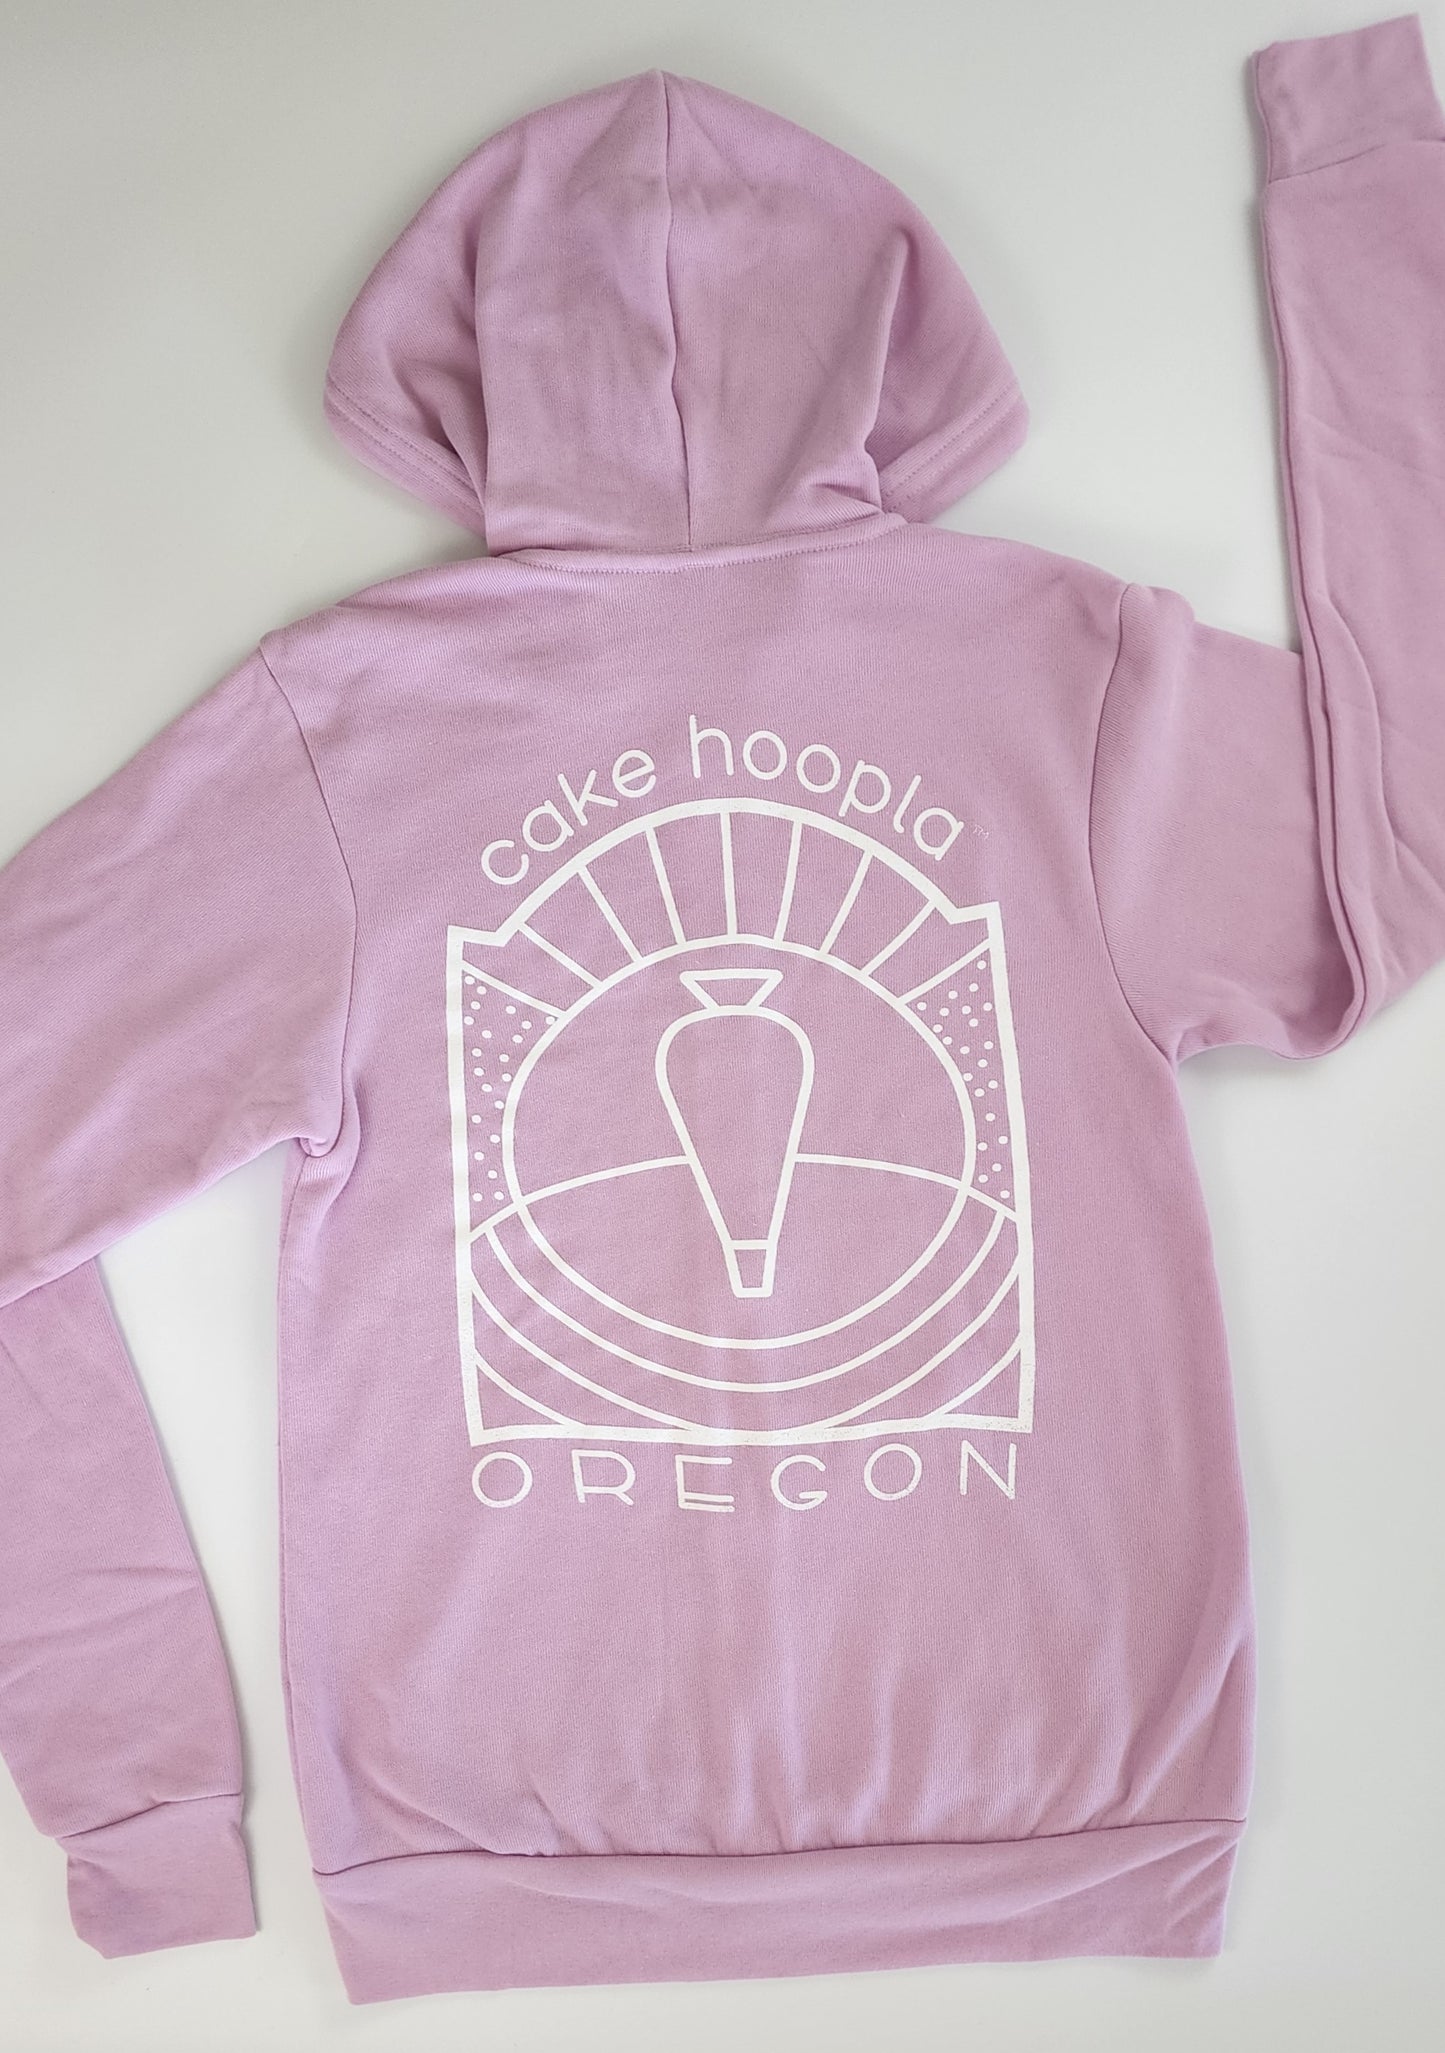 The backside of a unisex light-purple zip-up hoodie. The white screen printing in the center of the hoodie forms an abstract outlined image of a piping bag in front of a hill with rays of sunshine bursting from the center. Above the piping bag artwork is "cake hoopla" written in simple white lettering. Under the artwork is "OREGON" in caps with a slightly retro feel. The artwork combined with the nod to Oregon depicts Oregon's wine country.